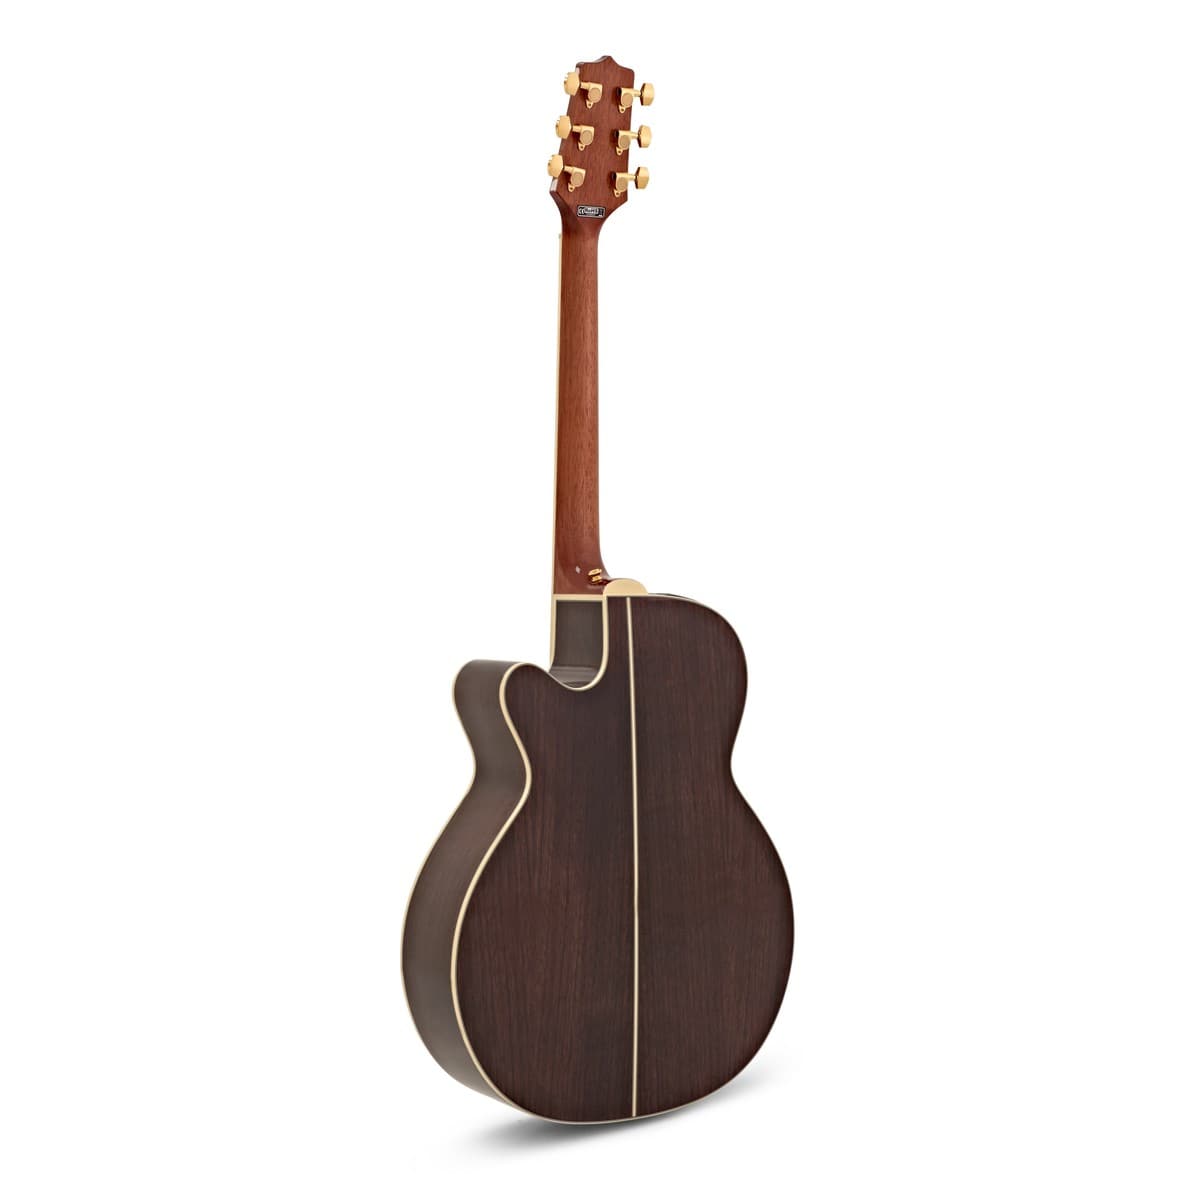 Takamine GN51CE NEX Cutaway Electro Acoustic - Natural Gloss